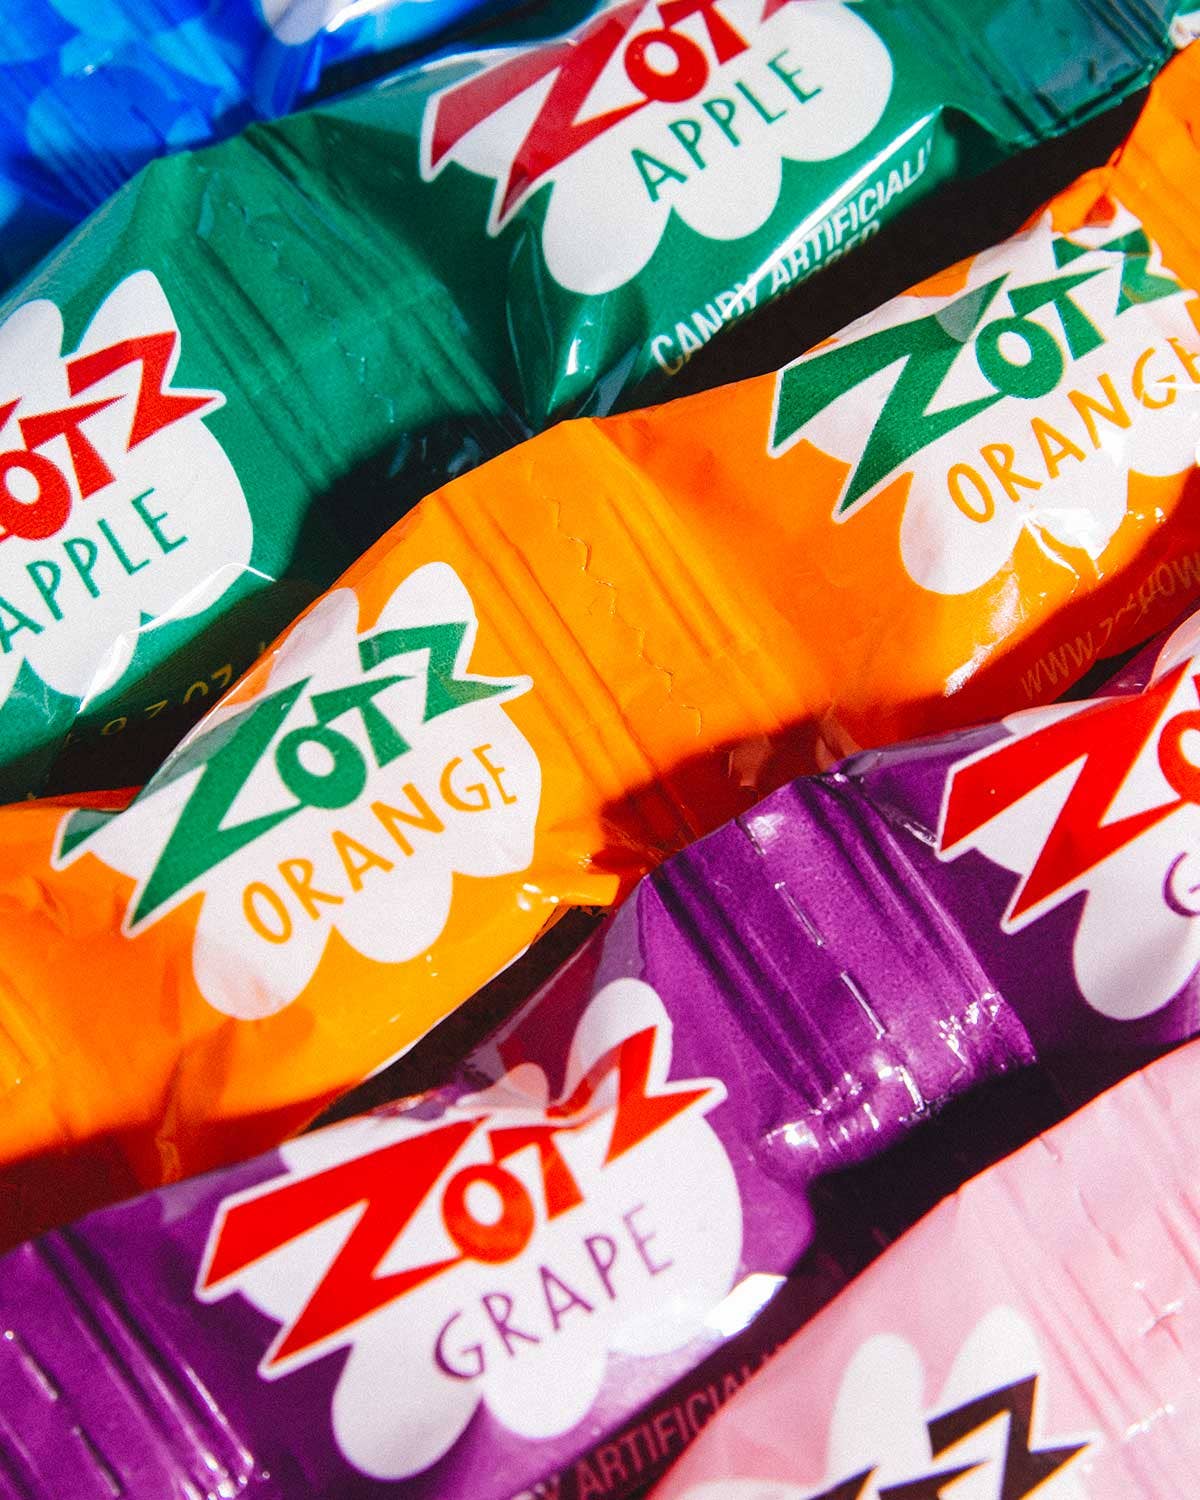 Have You Ever Tried Zotz, Italy’s Dangerously Sour Candy With an Explosive Surprise?